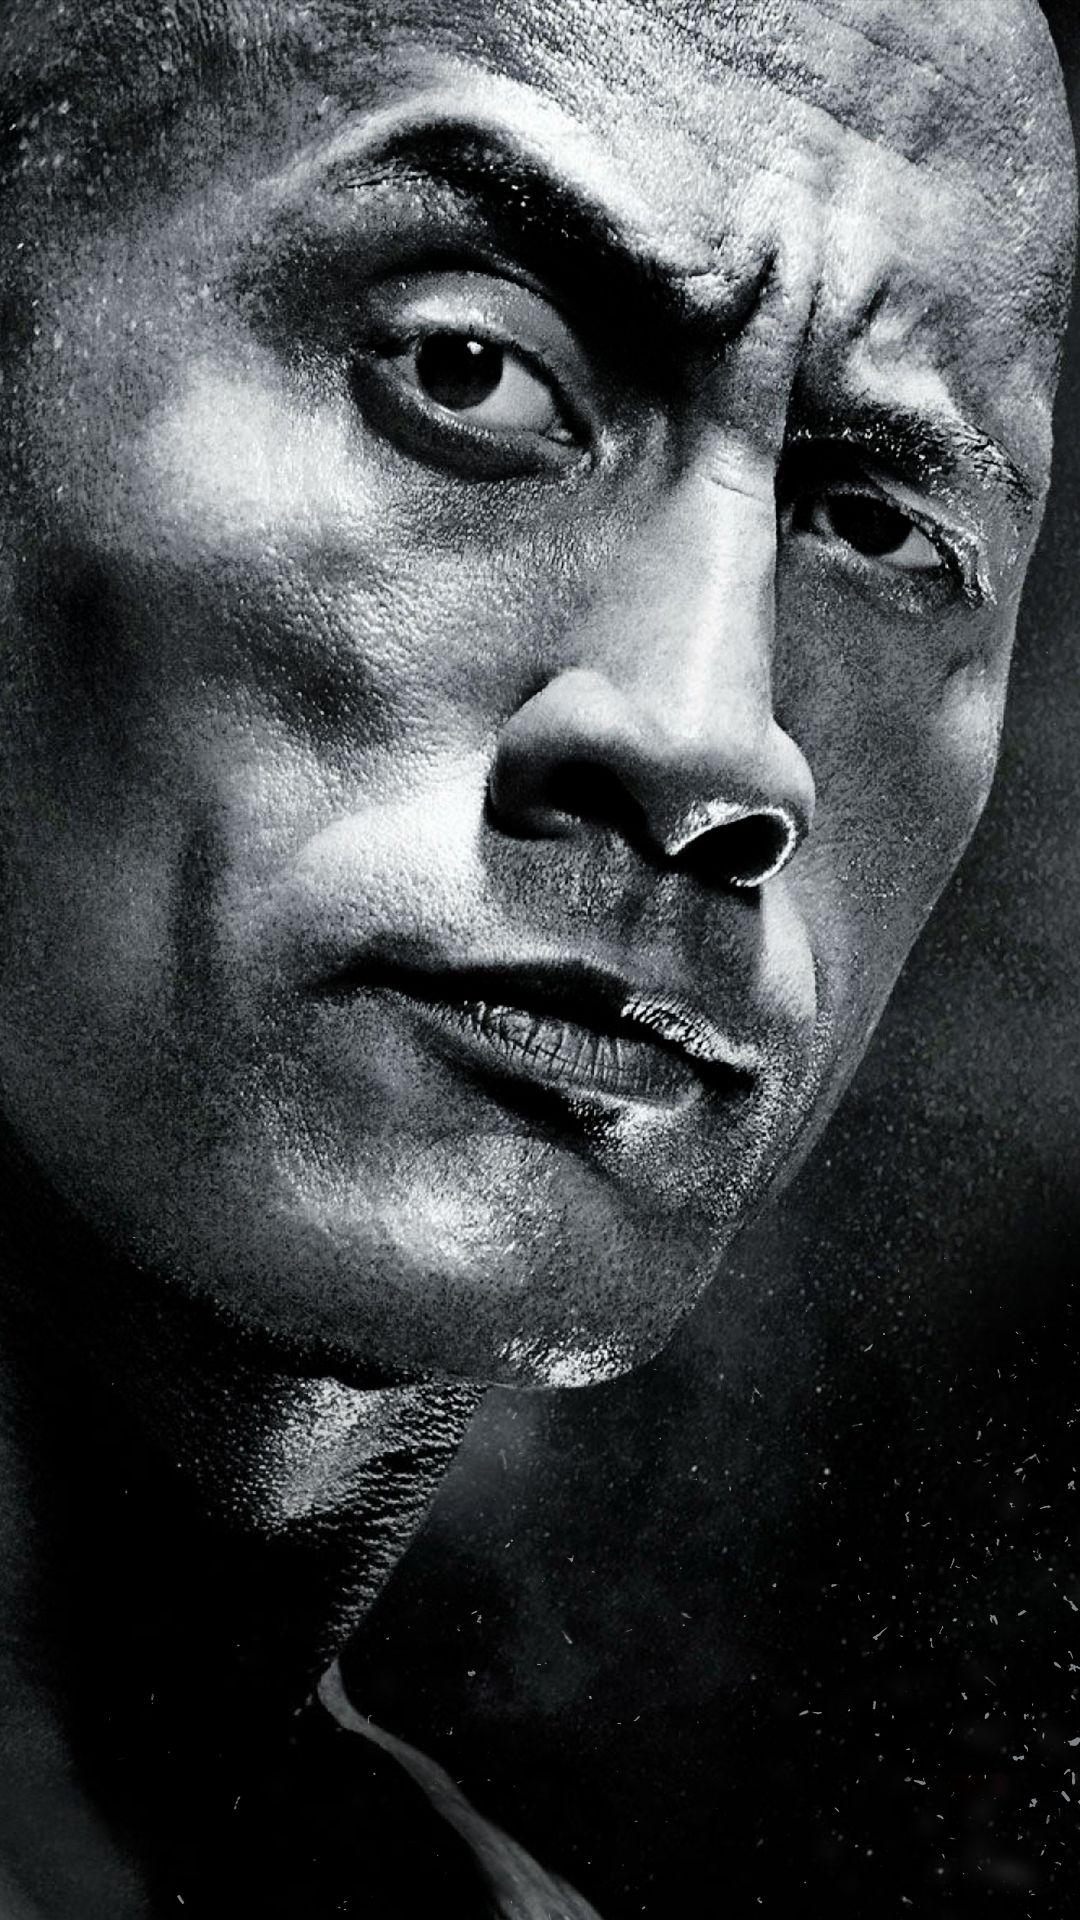 The Rock HD Wallpaper For Your iPhone 6